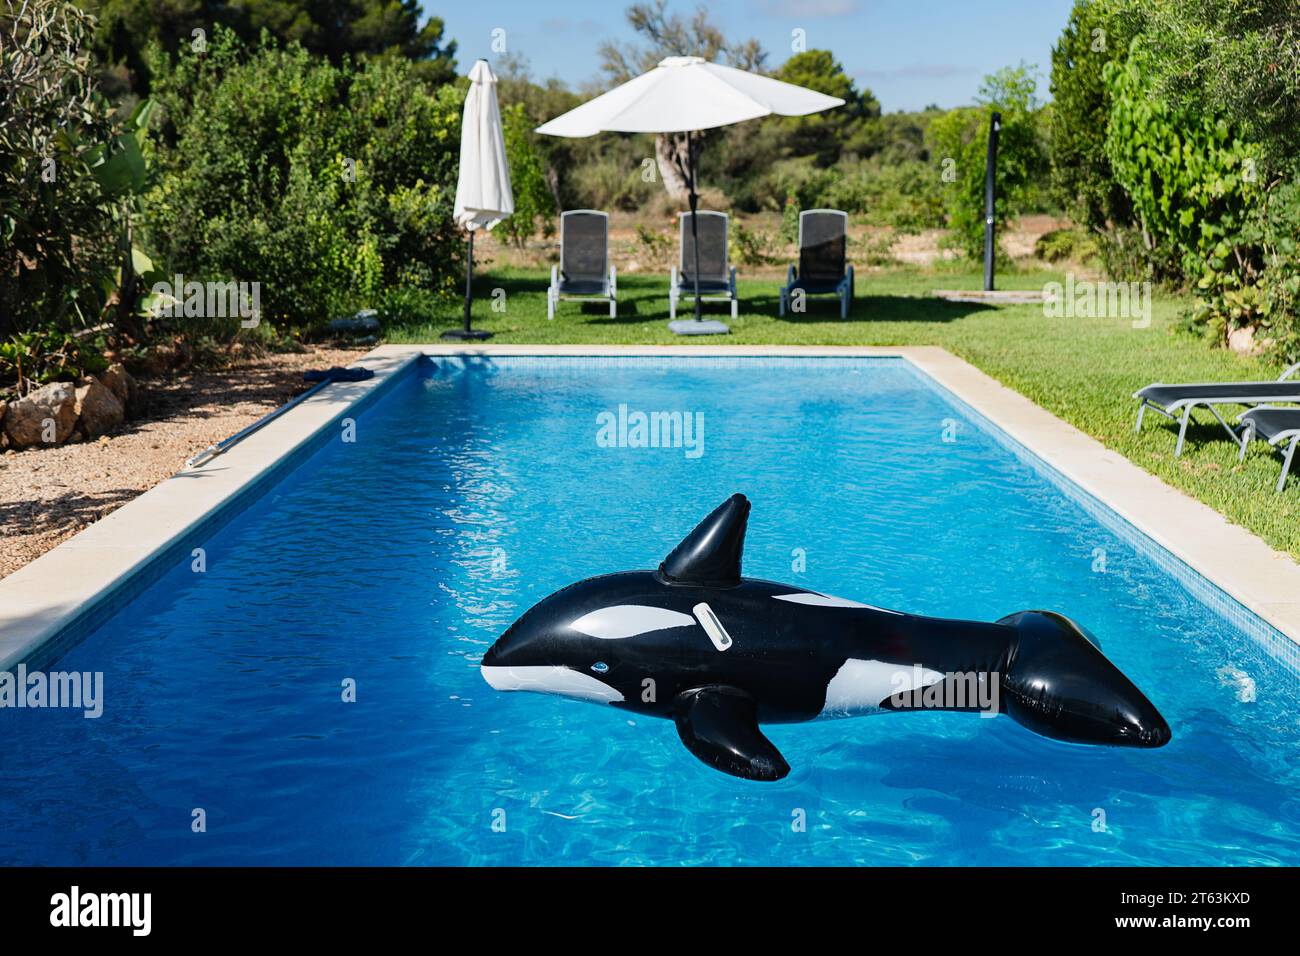 Inflatable orca toy floating on a swimming pool surrounded by greenery and poolside loungers under umbrellas. Stock Photo